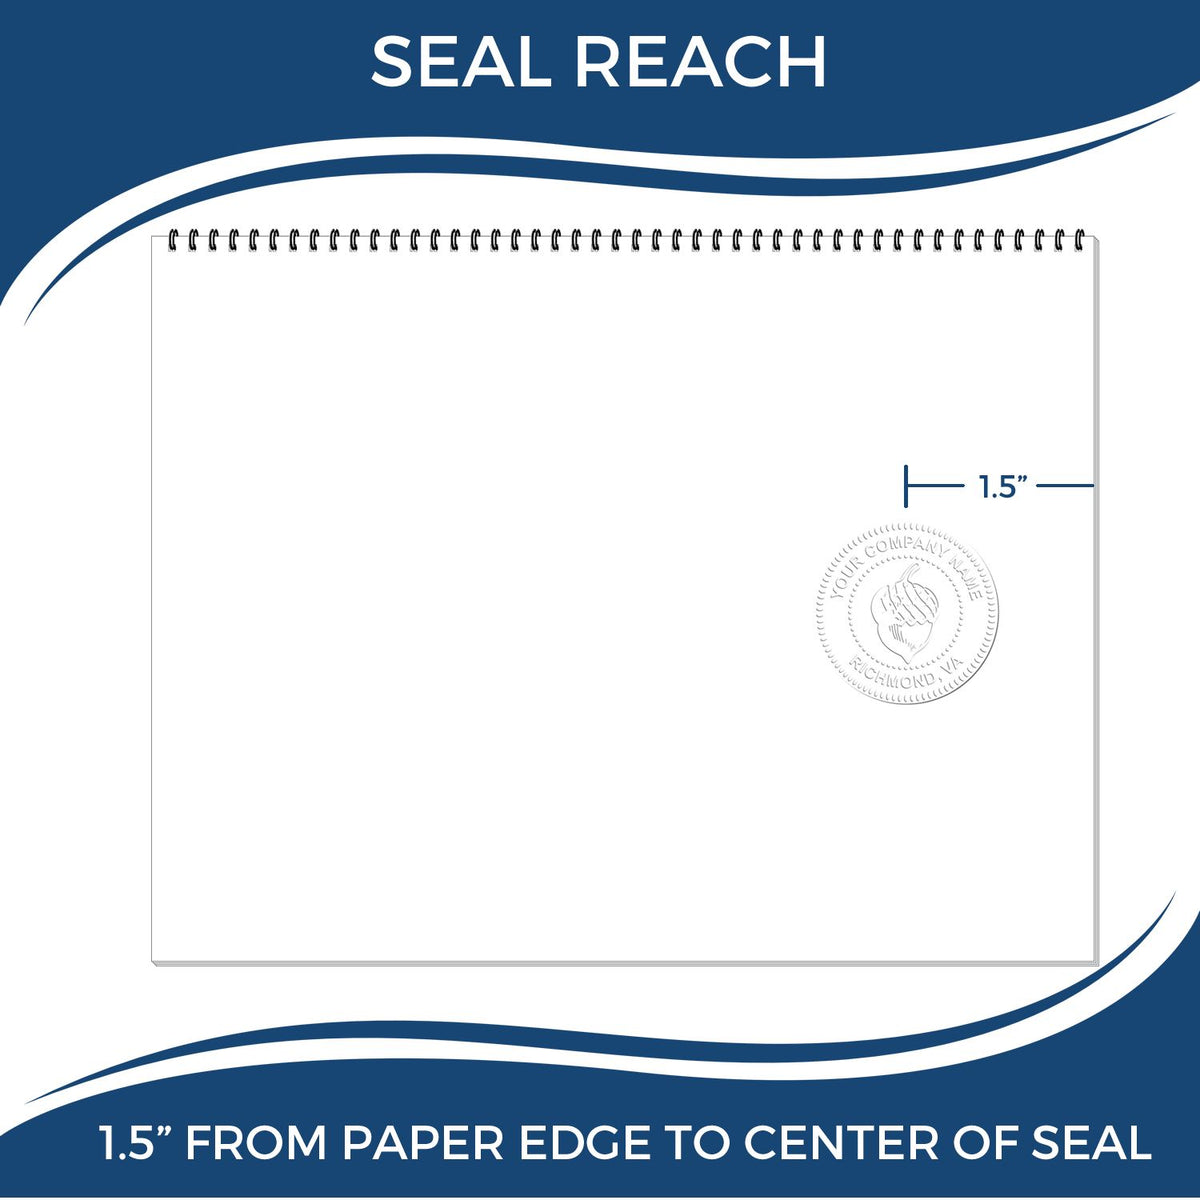 An infographic showing the seal reach which is represented by a ruler and a miniature seal image of the Gift District of Columbia Land Surveyor Seal